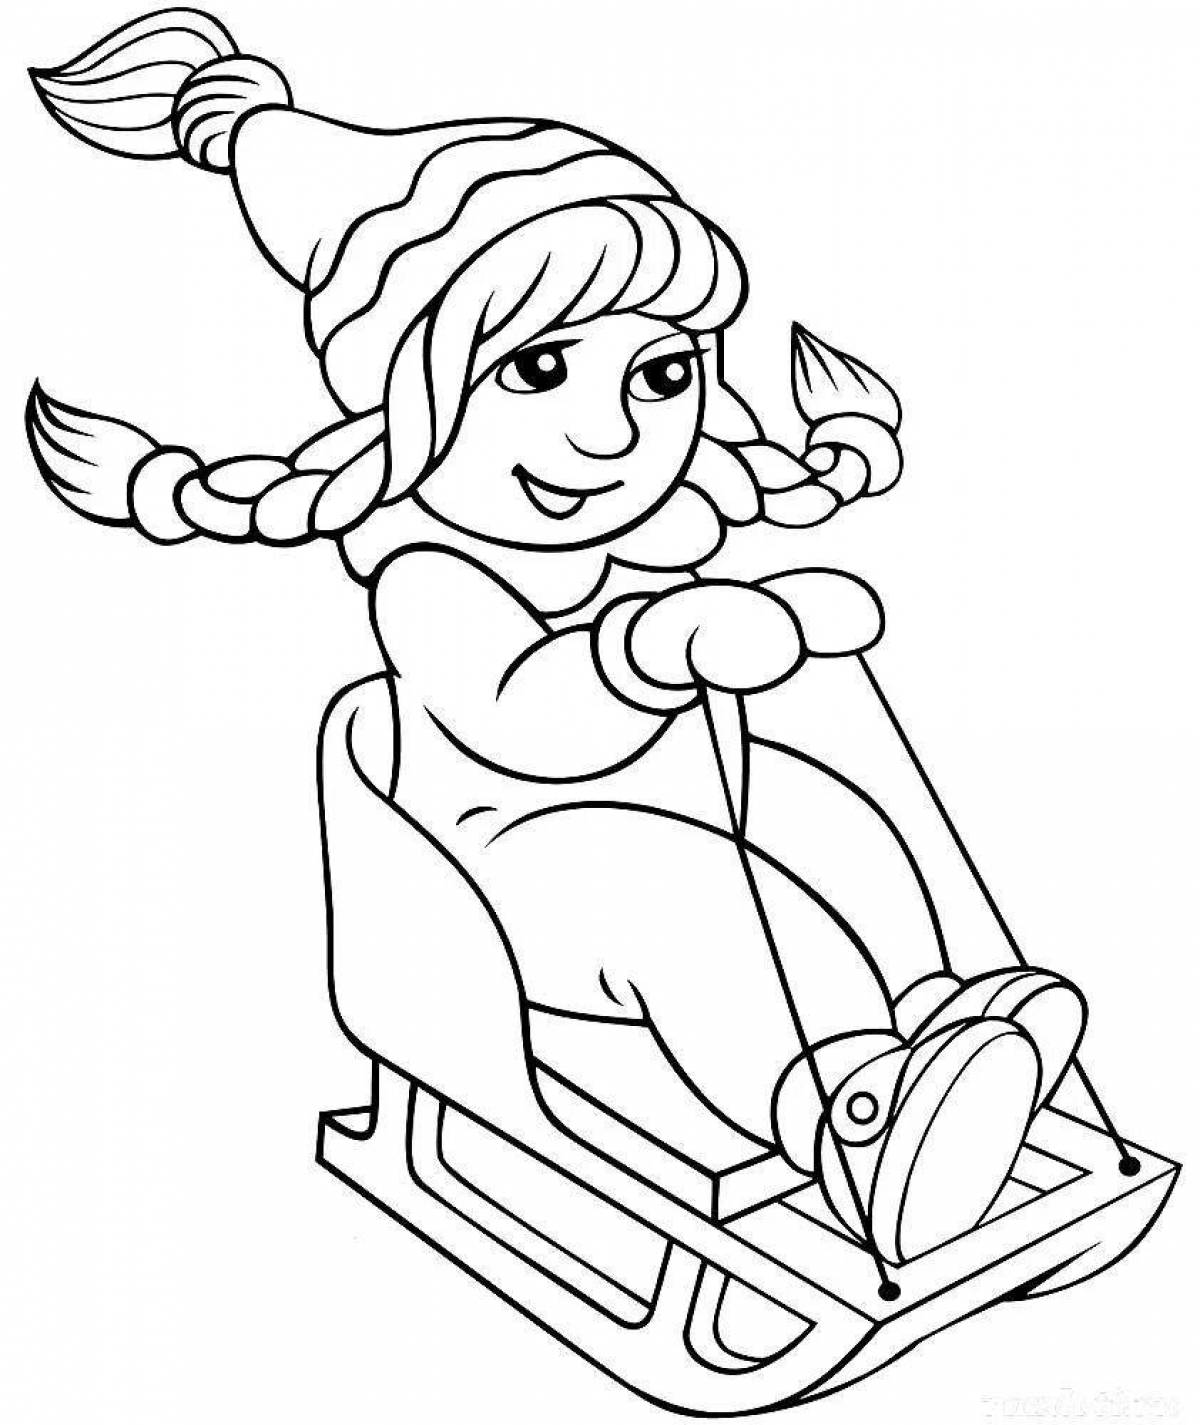 Exciting children's sled coloring book